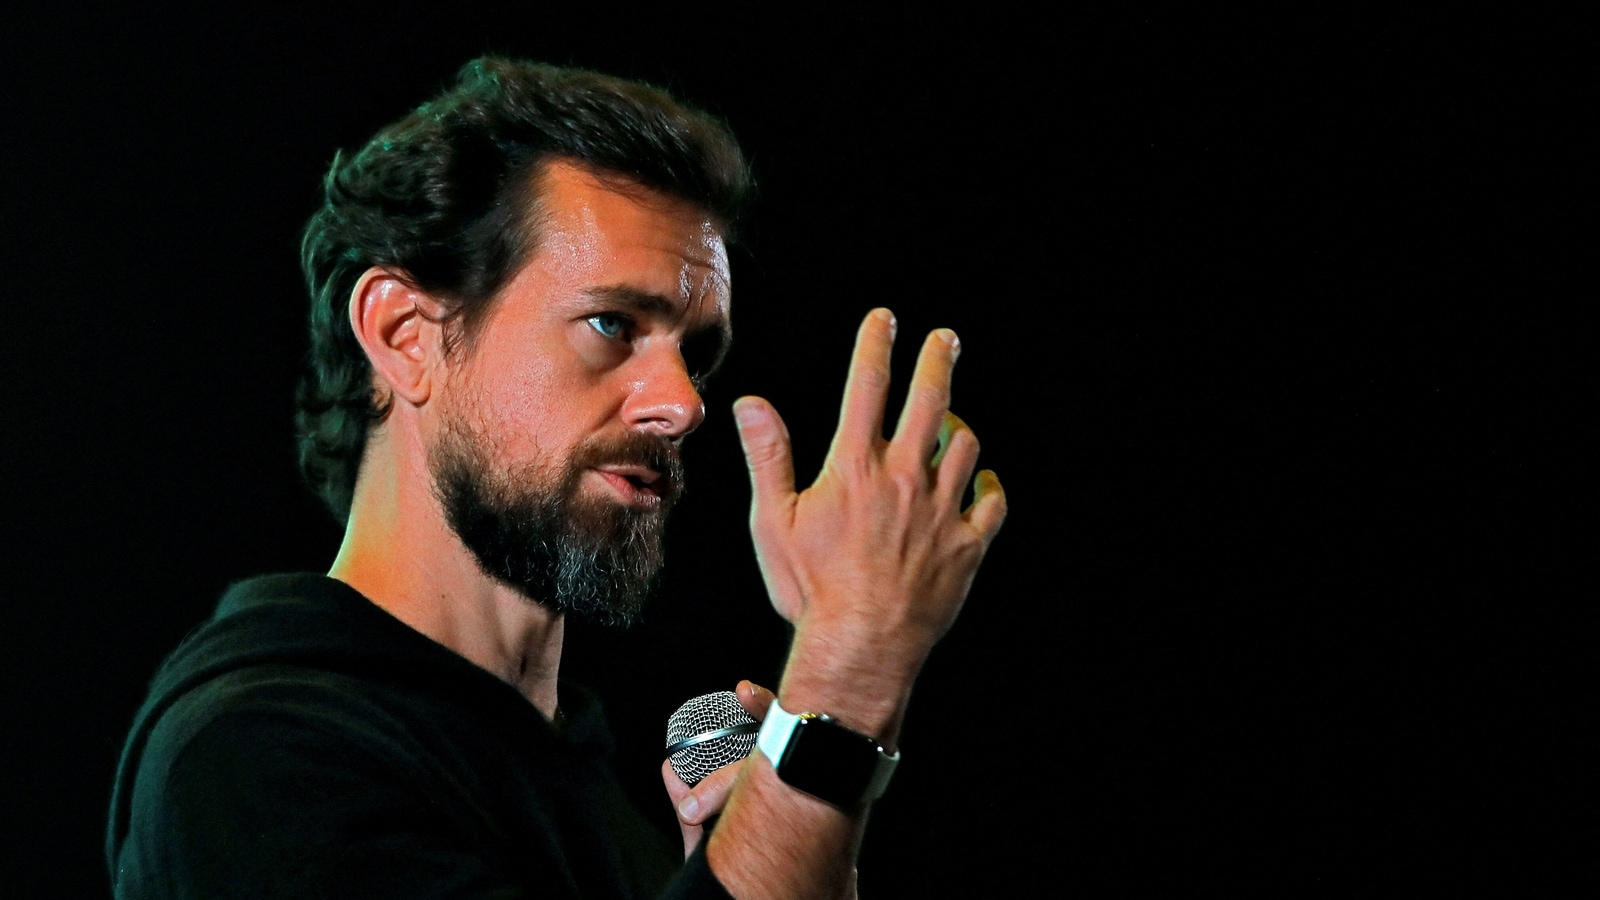 Jack Dorsey: Will Apple Vision Pro Turn Us All Into 'WALL-E?